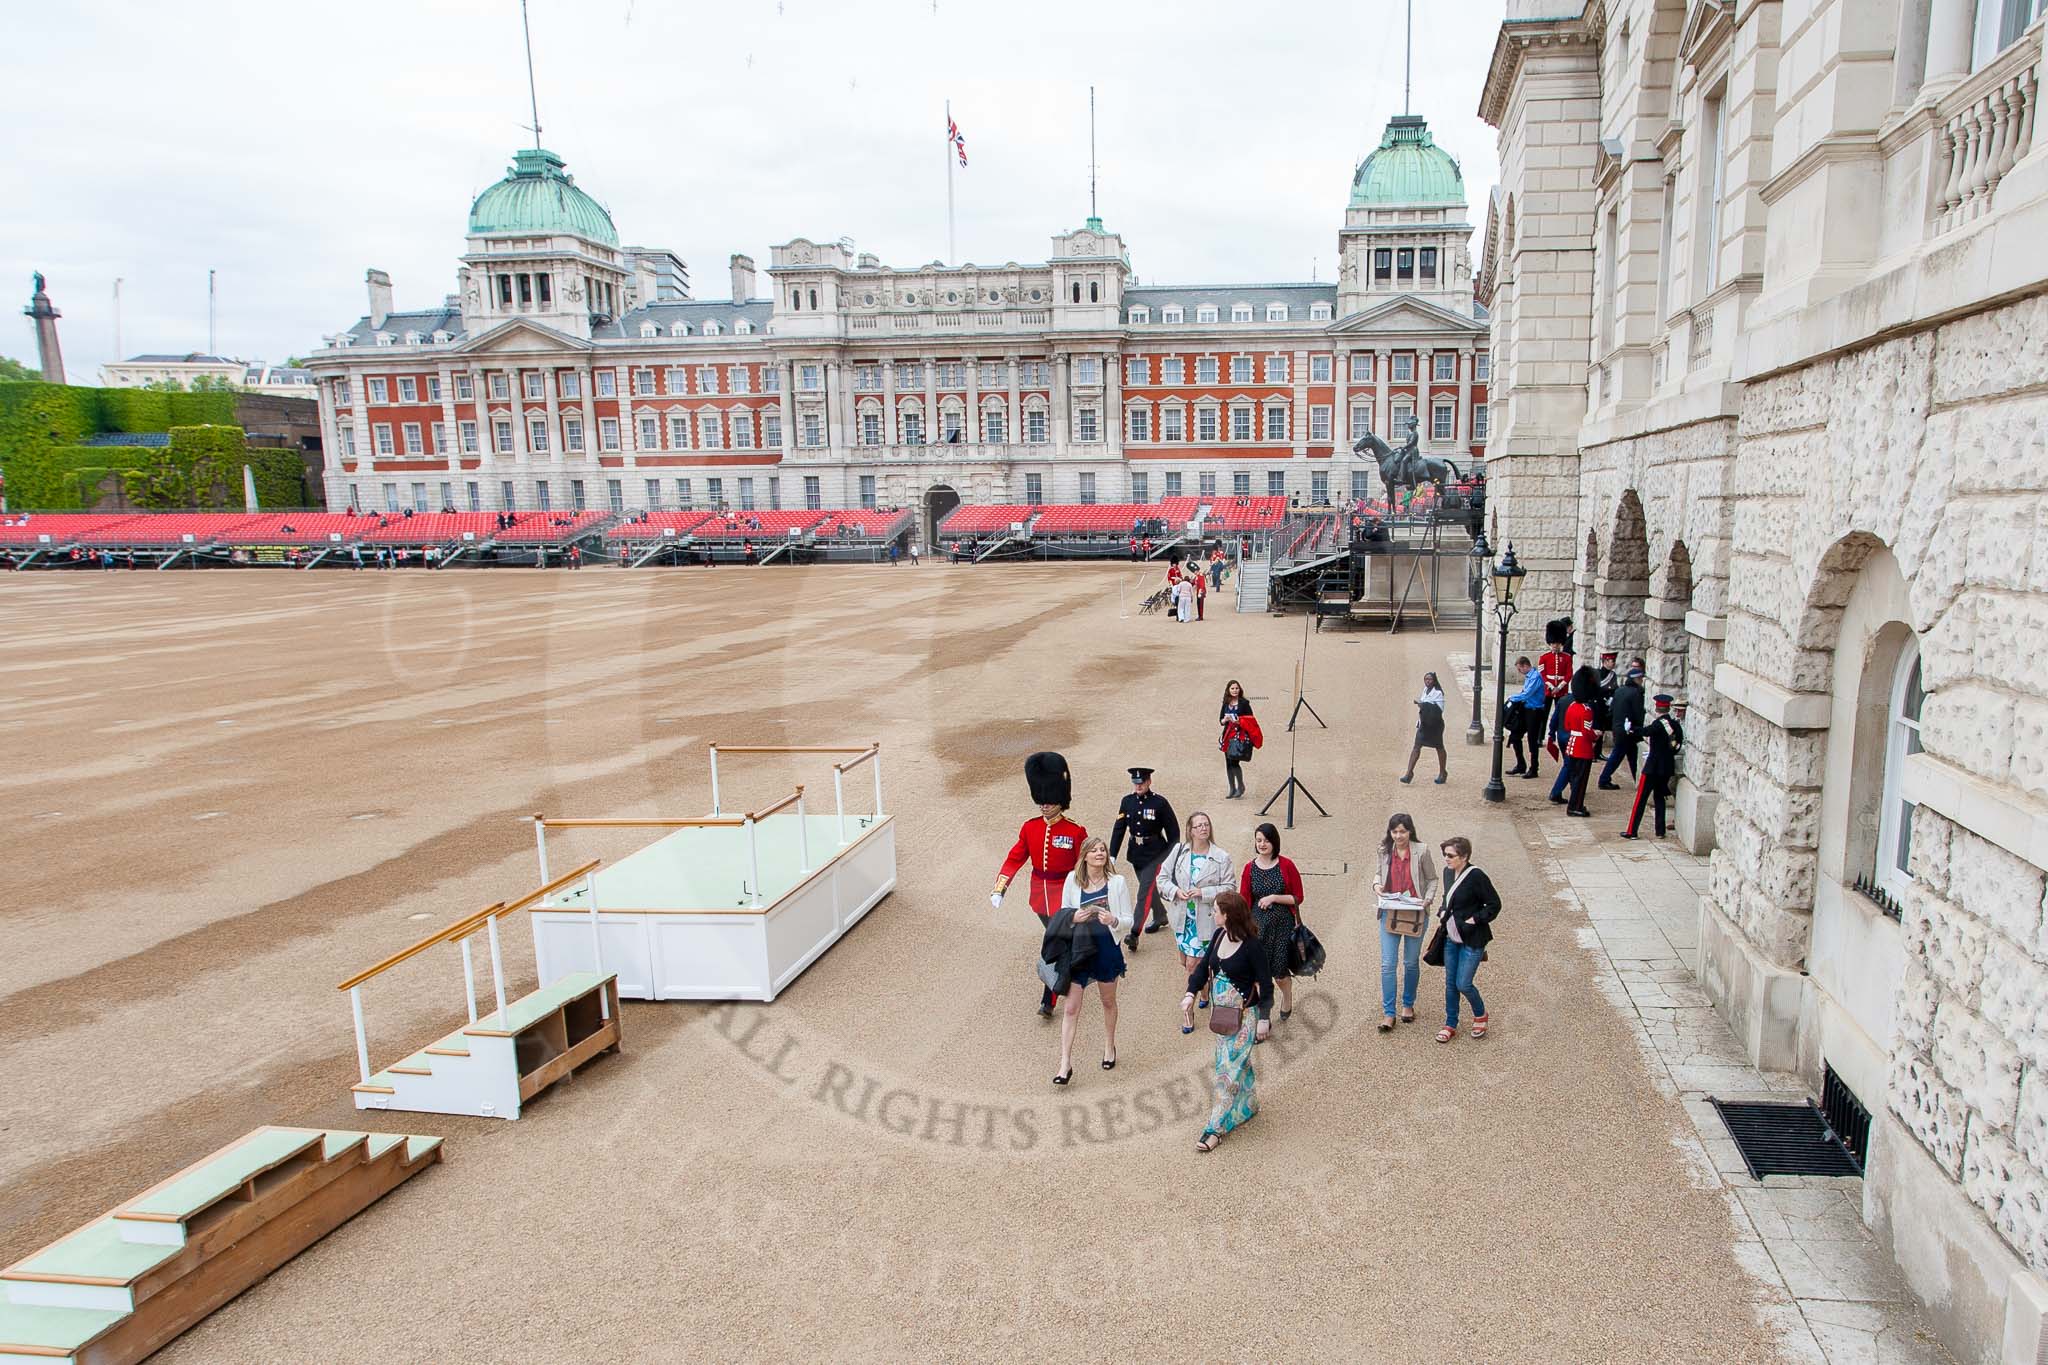 The first spectators arriving at Horse Guards Parade.